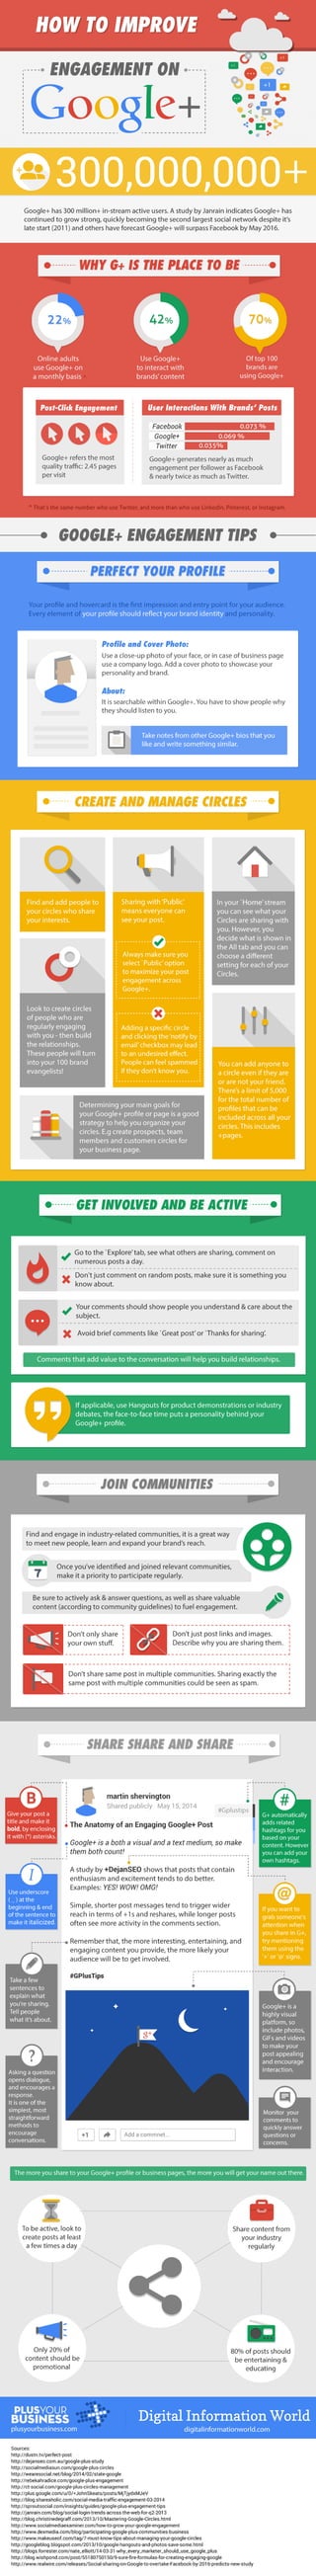 How to Improve Google+ Engagement